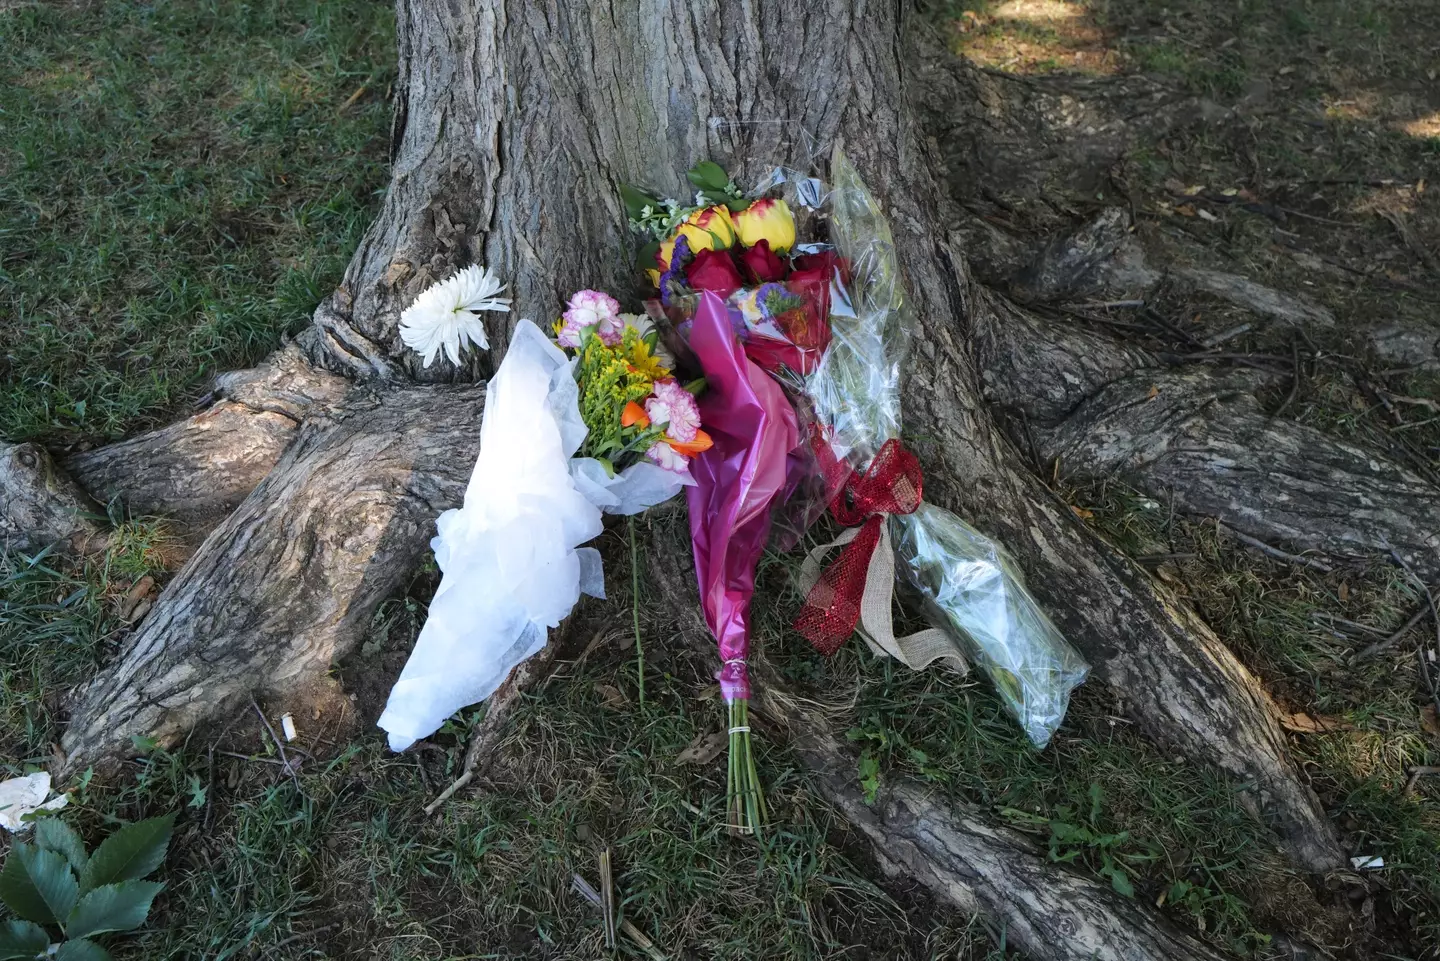 Tributes have been paid to the three people who died in the lightning strike.